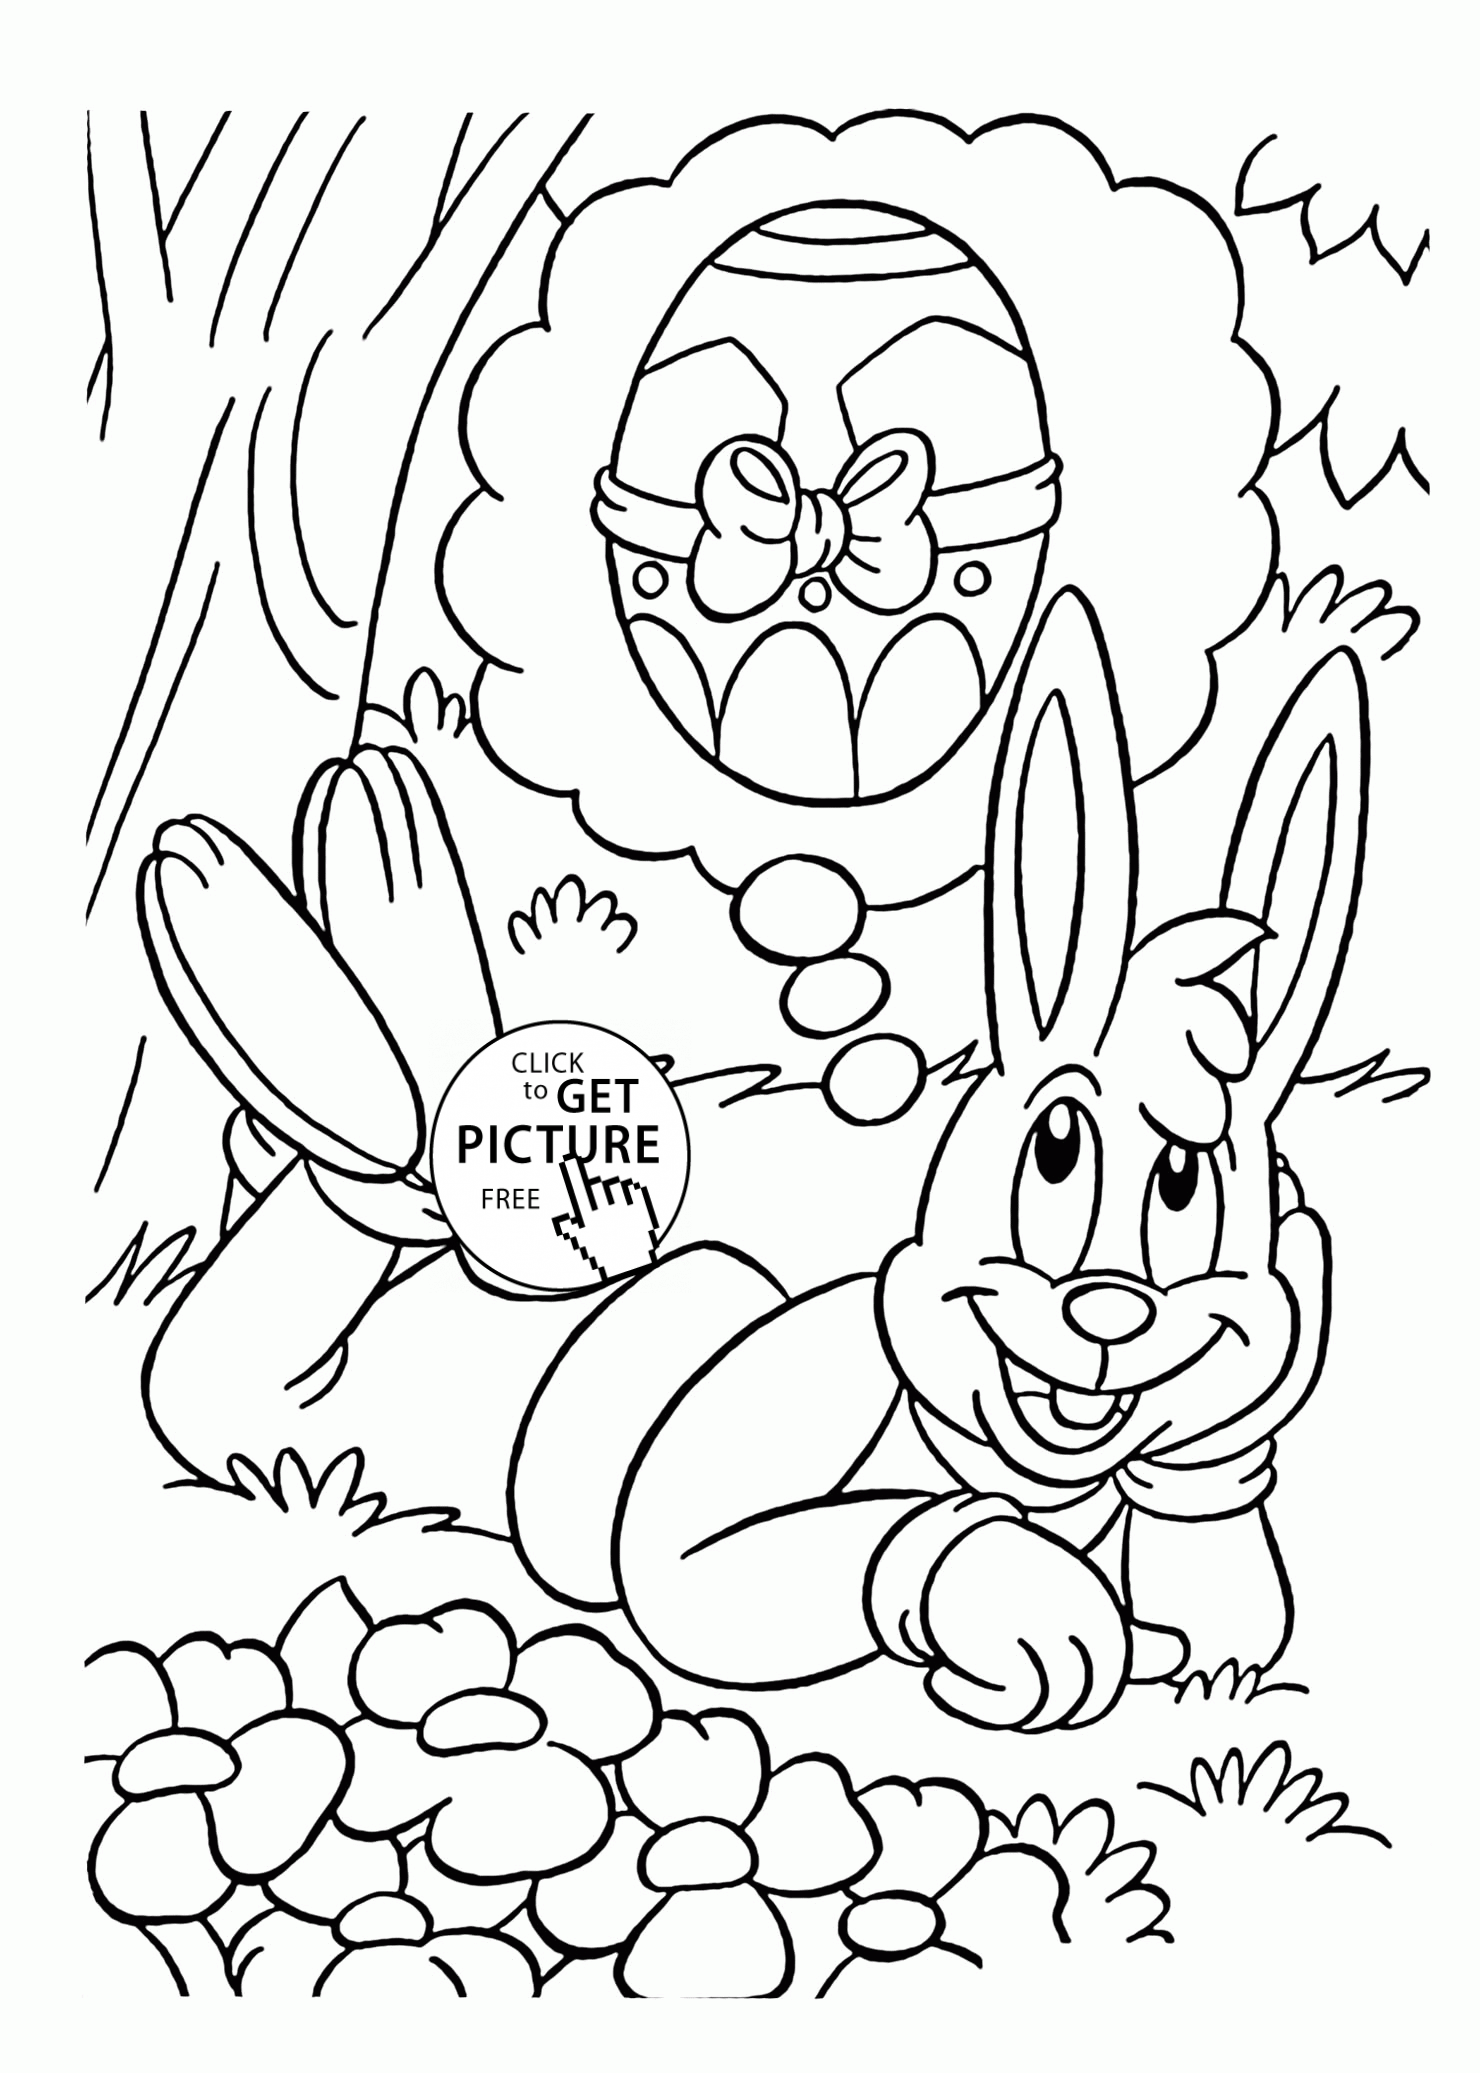 Easter Bunny in the Forest coloring page for kids, coloring pages ...